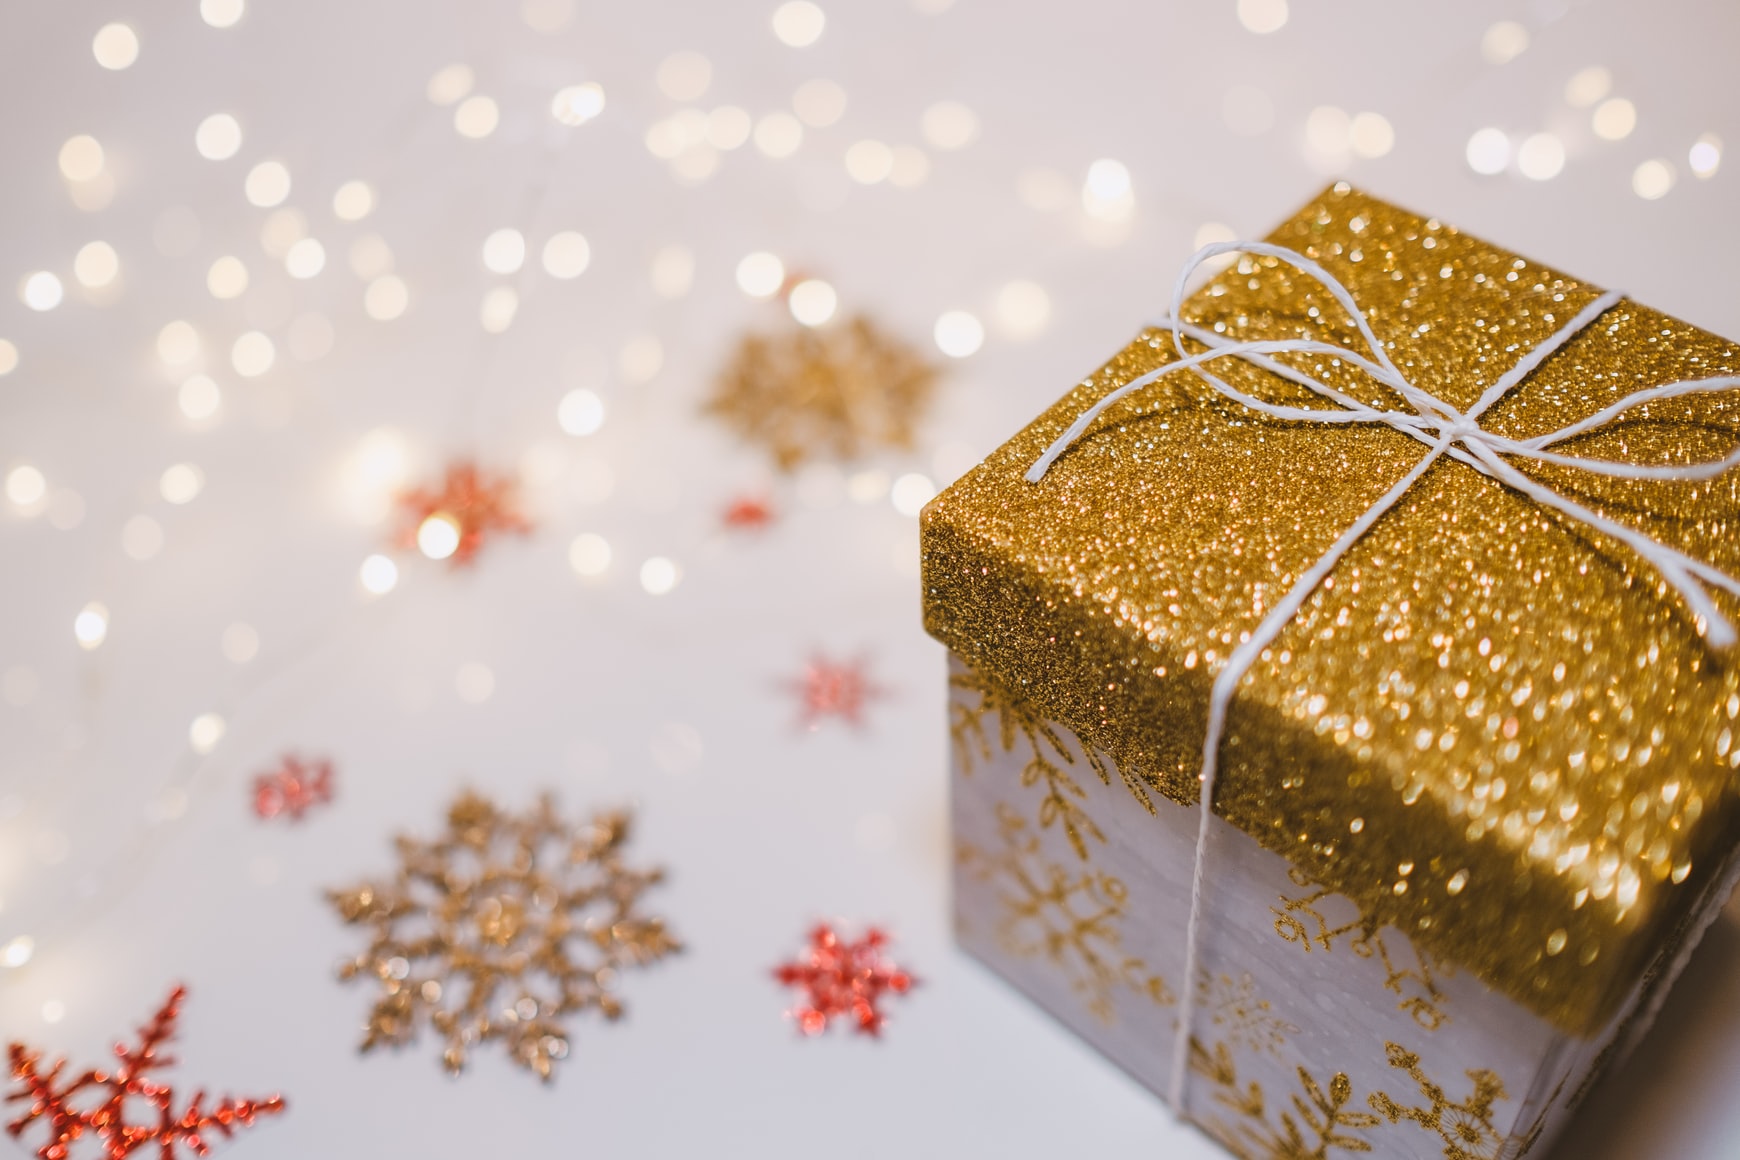 a christmas present box with a gold glittery lid is set on a surface with lights and gold snowflakes